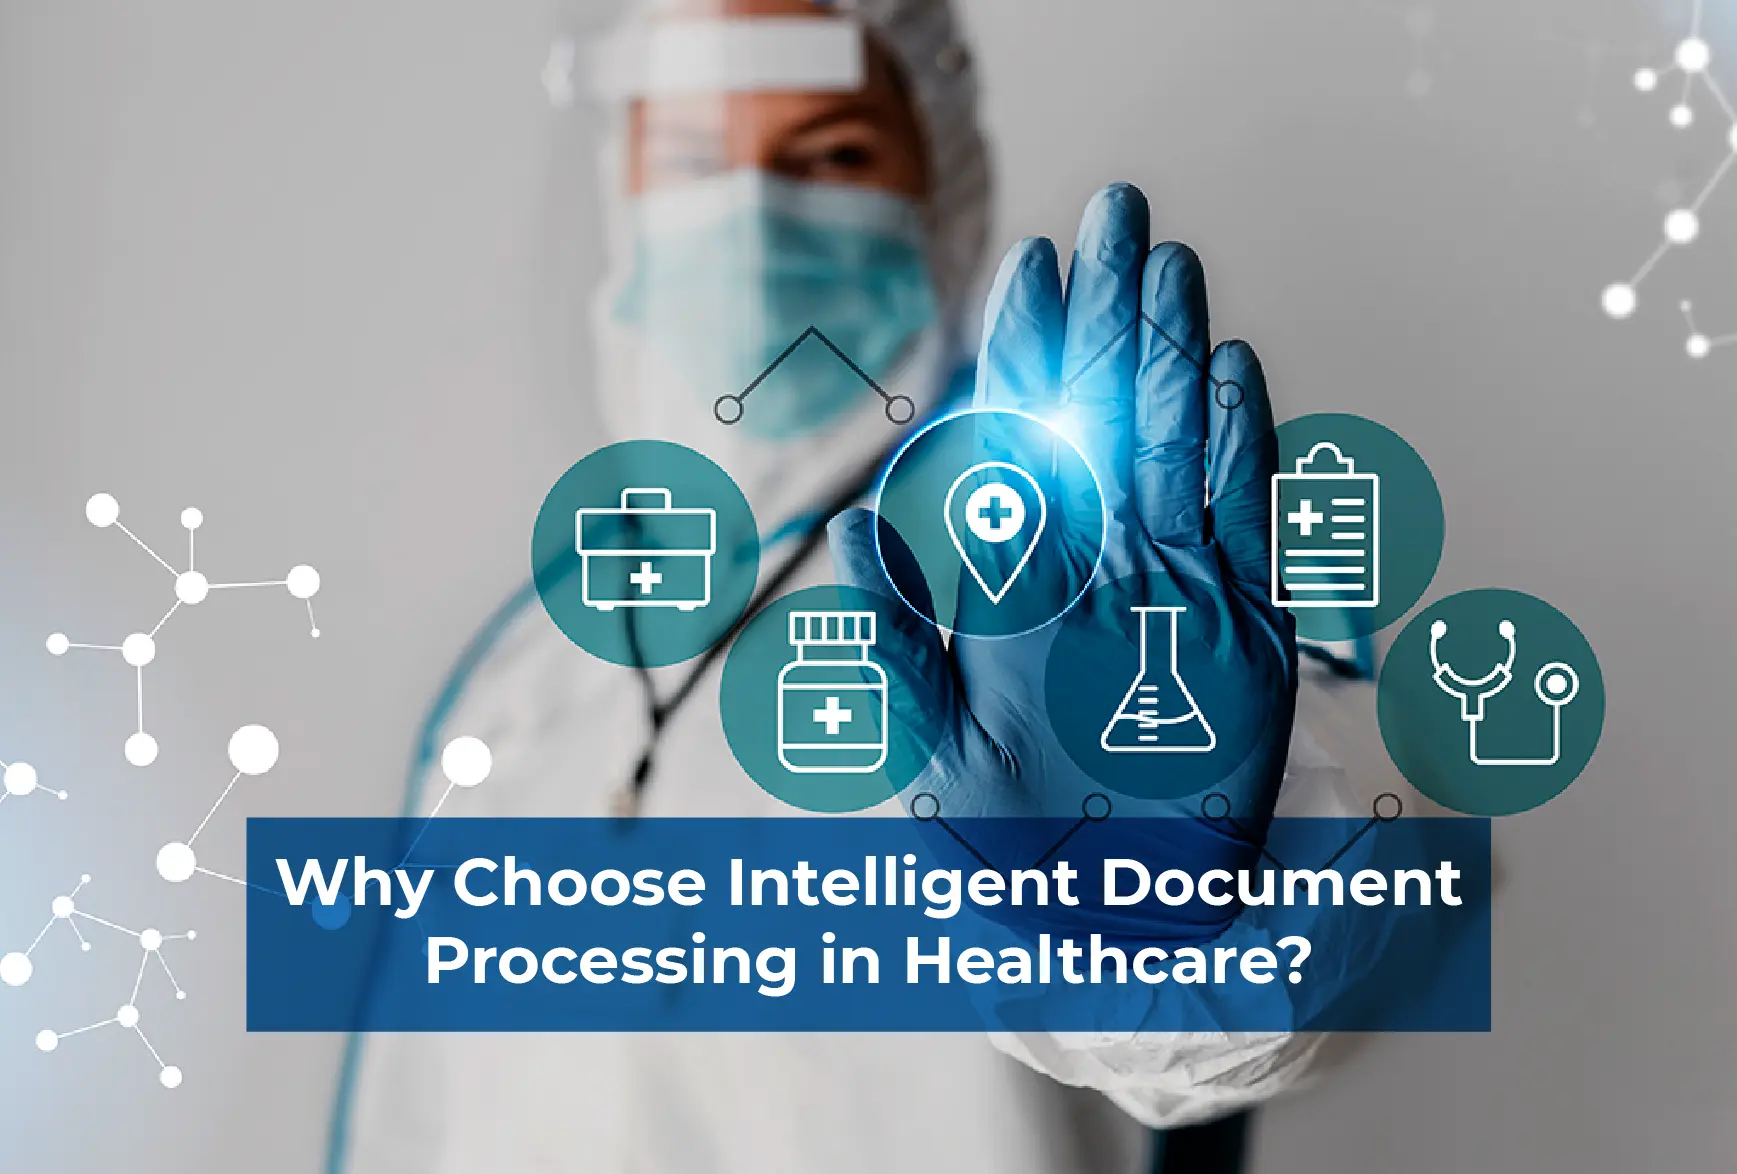 Why Choose Intelligent Document Processing in Healthcare?